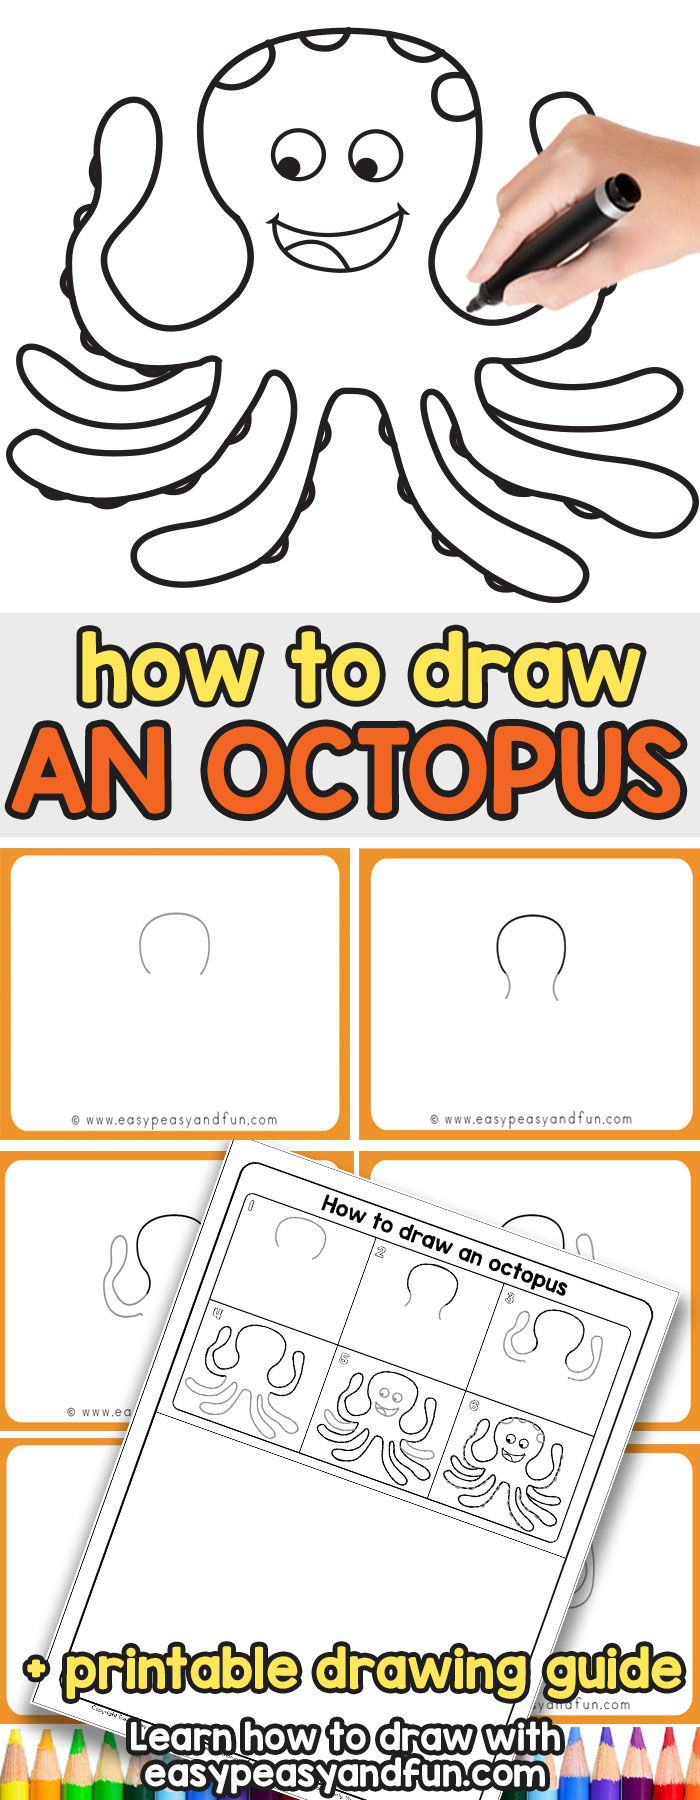 How to Draw Cartoon Octopus - Step by Step Drawing Tutorial for Kids